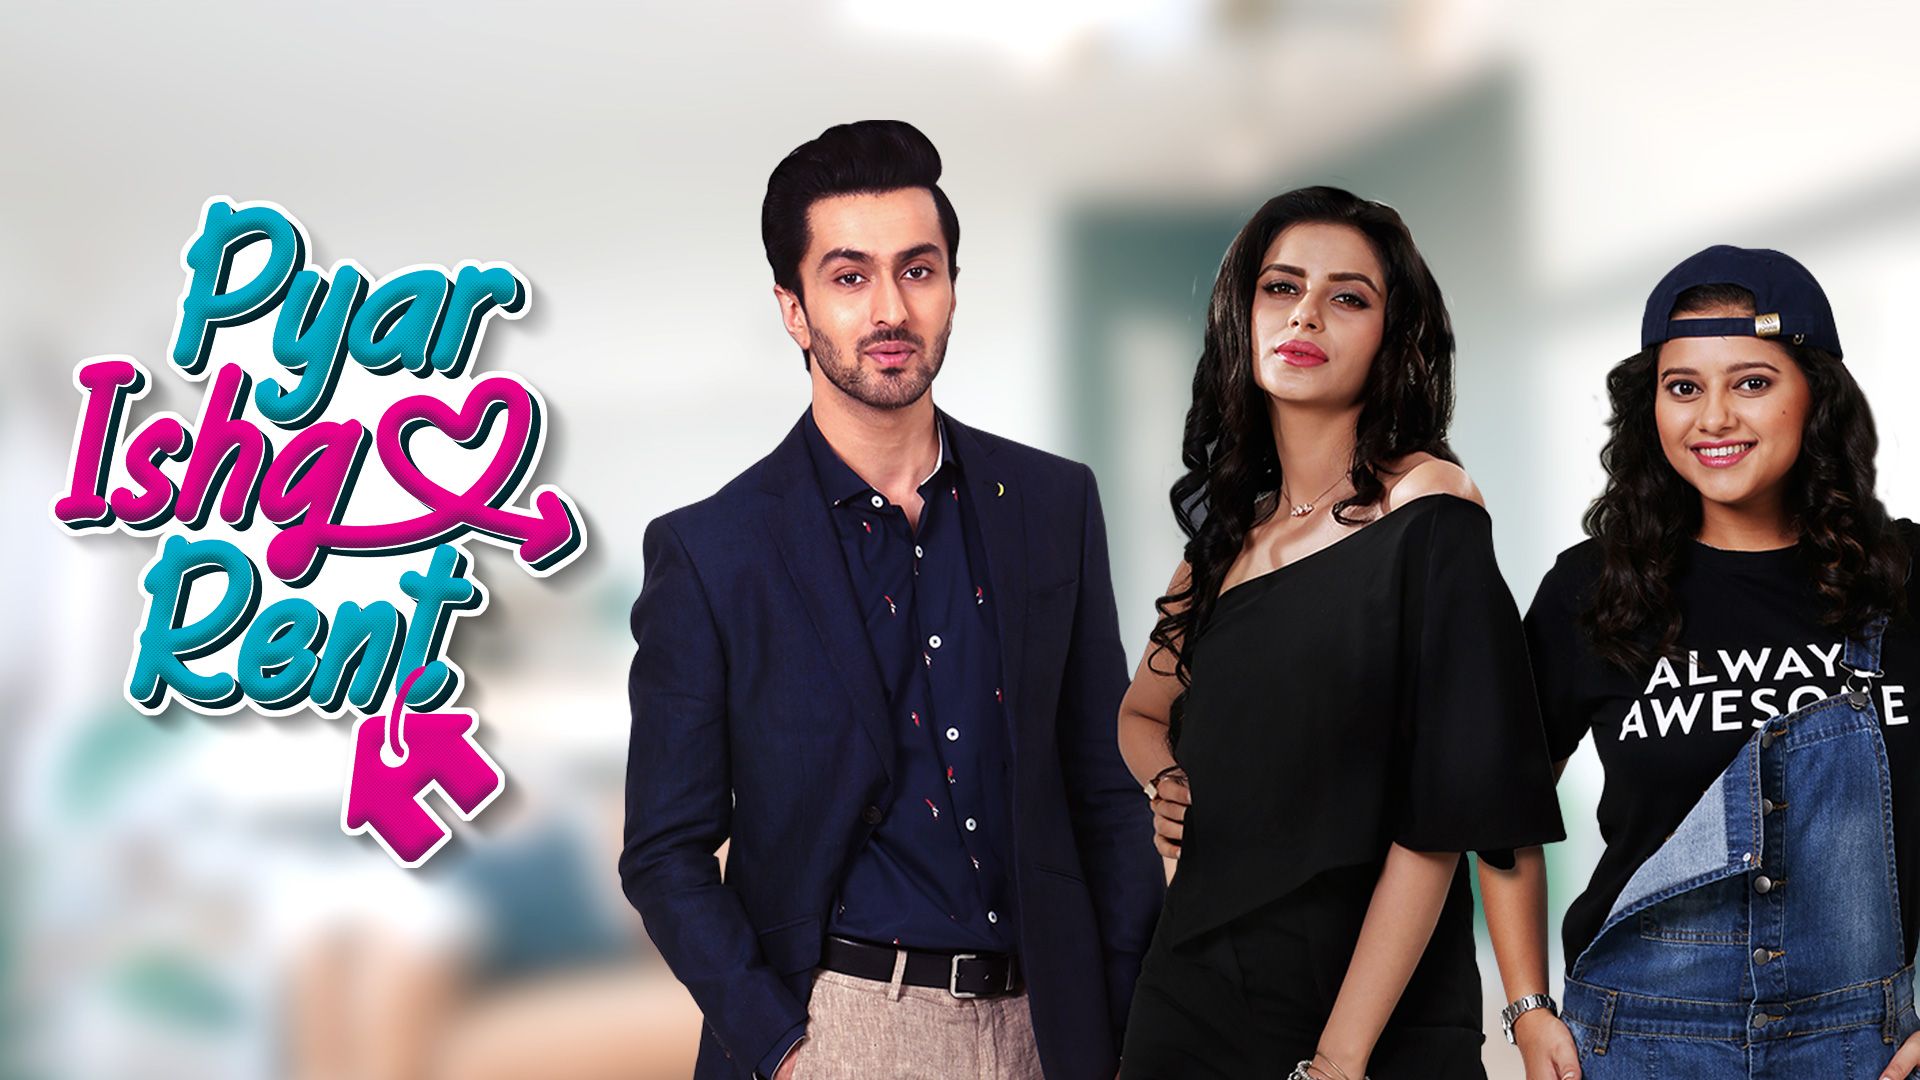 Get to know your roommates better; watch Pyar Ishq Rent on SonyLIV